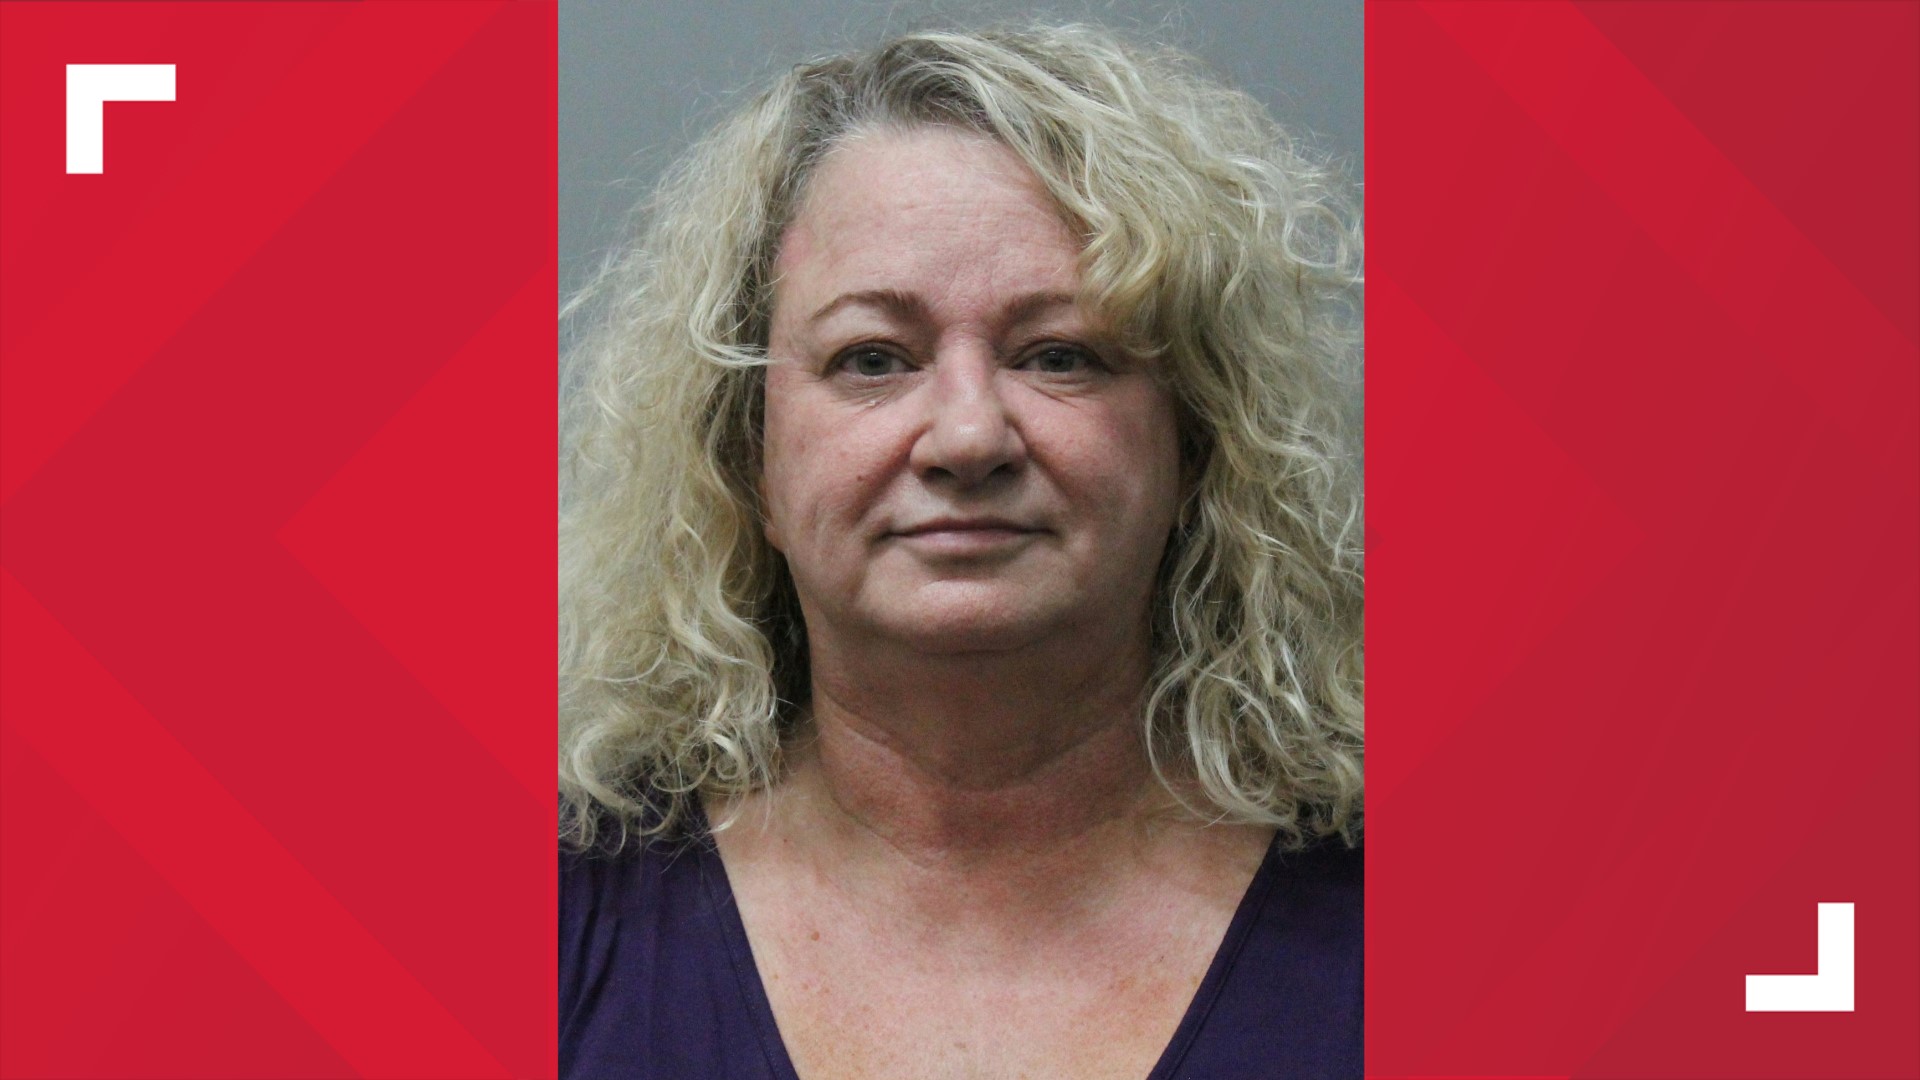 Teresa Todd was arrested on Friday, according to the Presidio County Sheriff's Office.